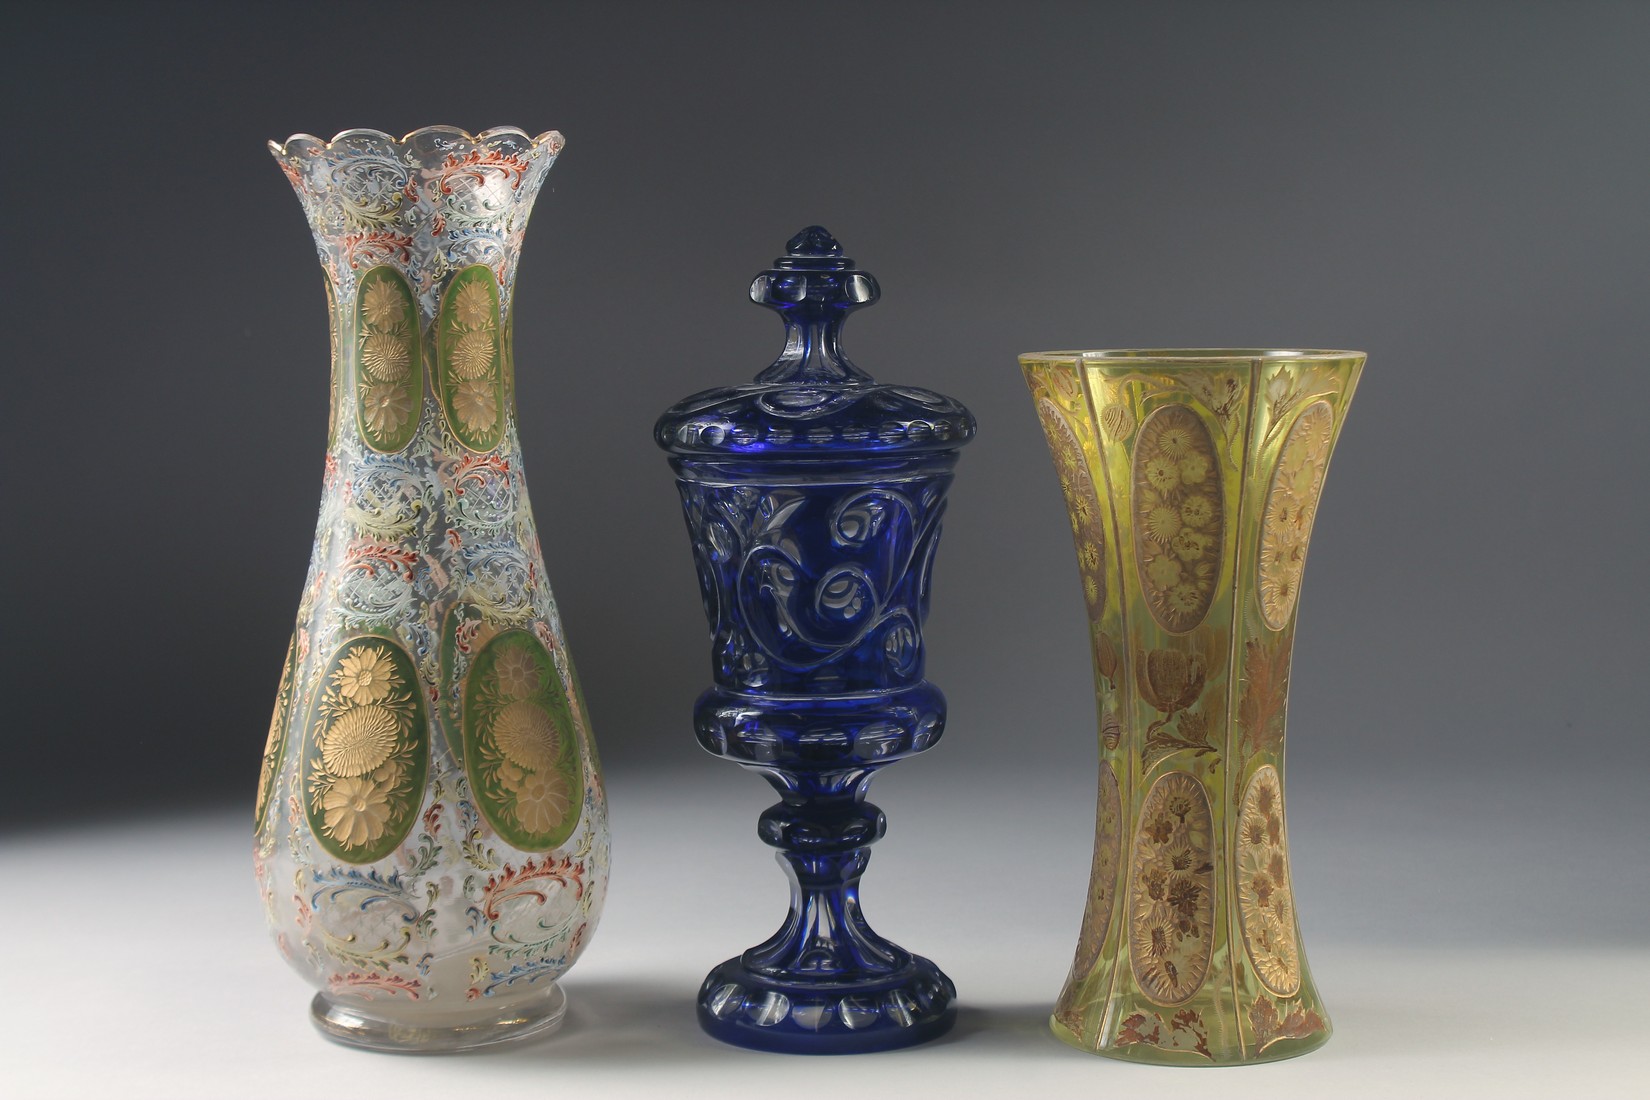 THREE VARIOUS BOHEMIAN GLASS VASES one with a cover. 13ins, 10ins & 9.5ins high. - Image 3 of 6